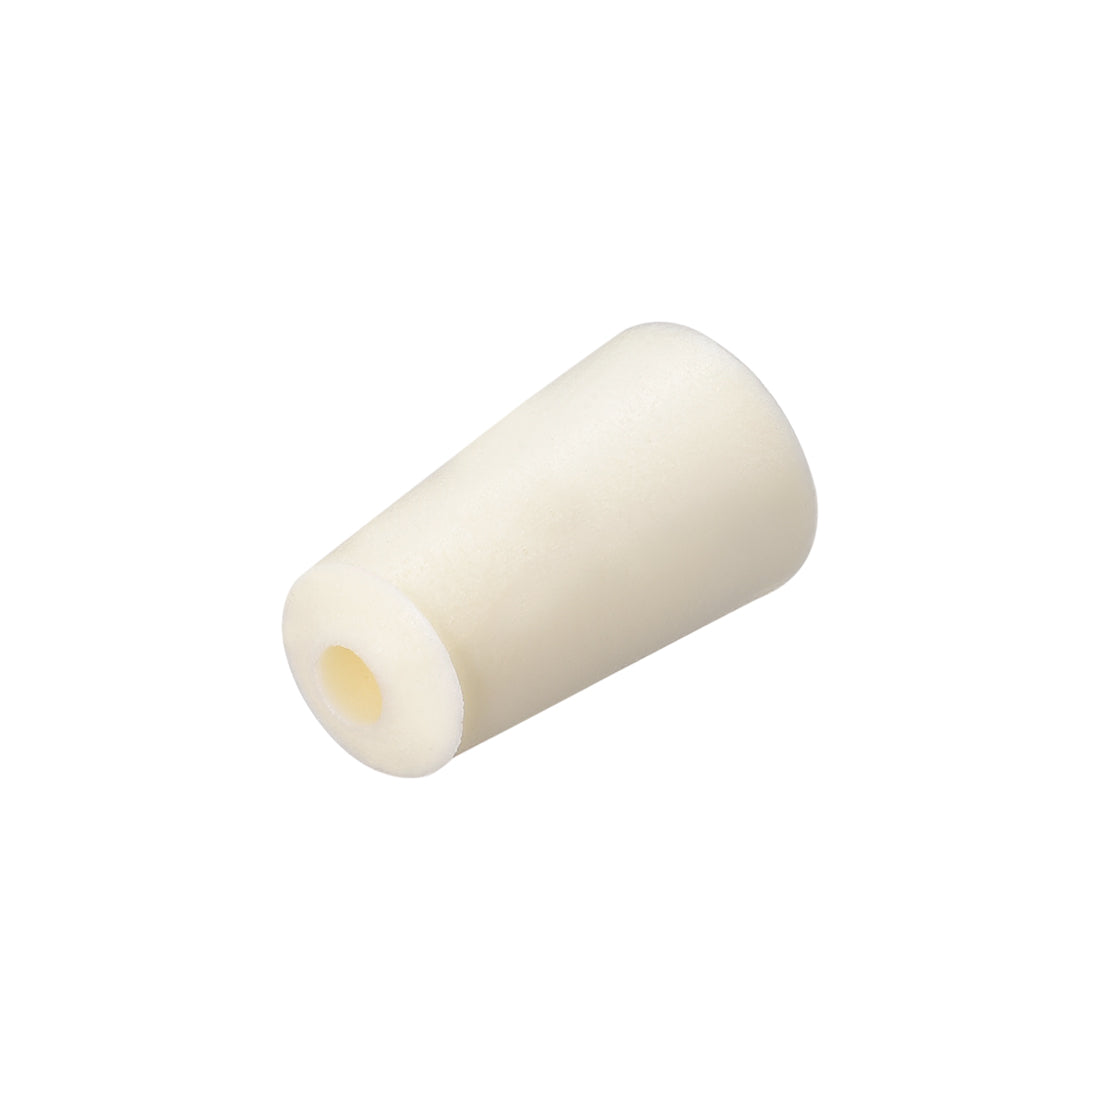 uxcell Uxcell 15-19mm Beige Drilled Silicone Stopper Plugs for Flask Test Tube Stopper 2pcs